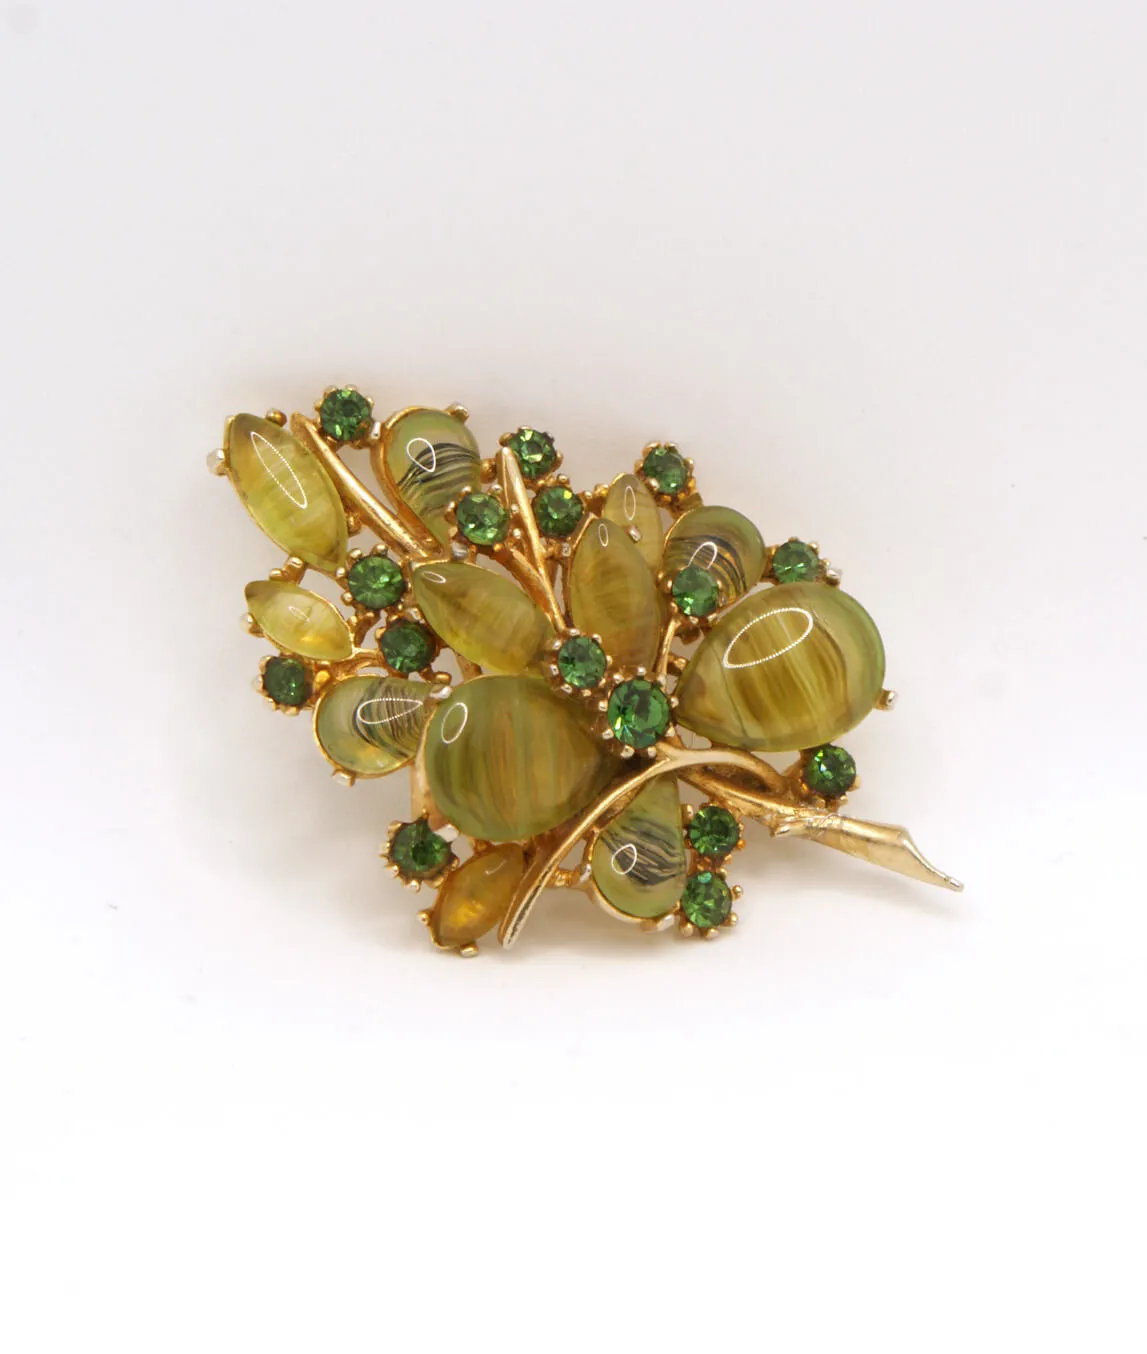 Vintage ART tree brooch with green glass stones